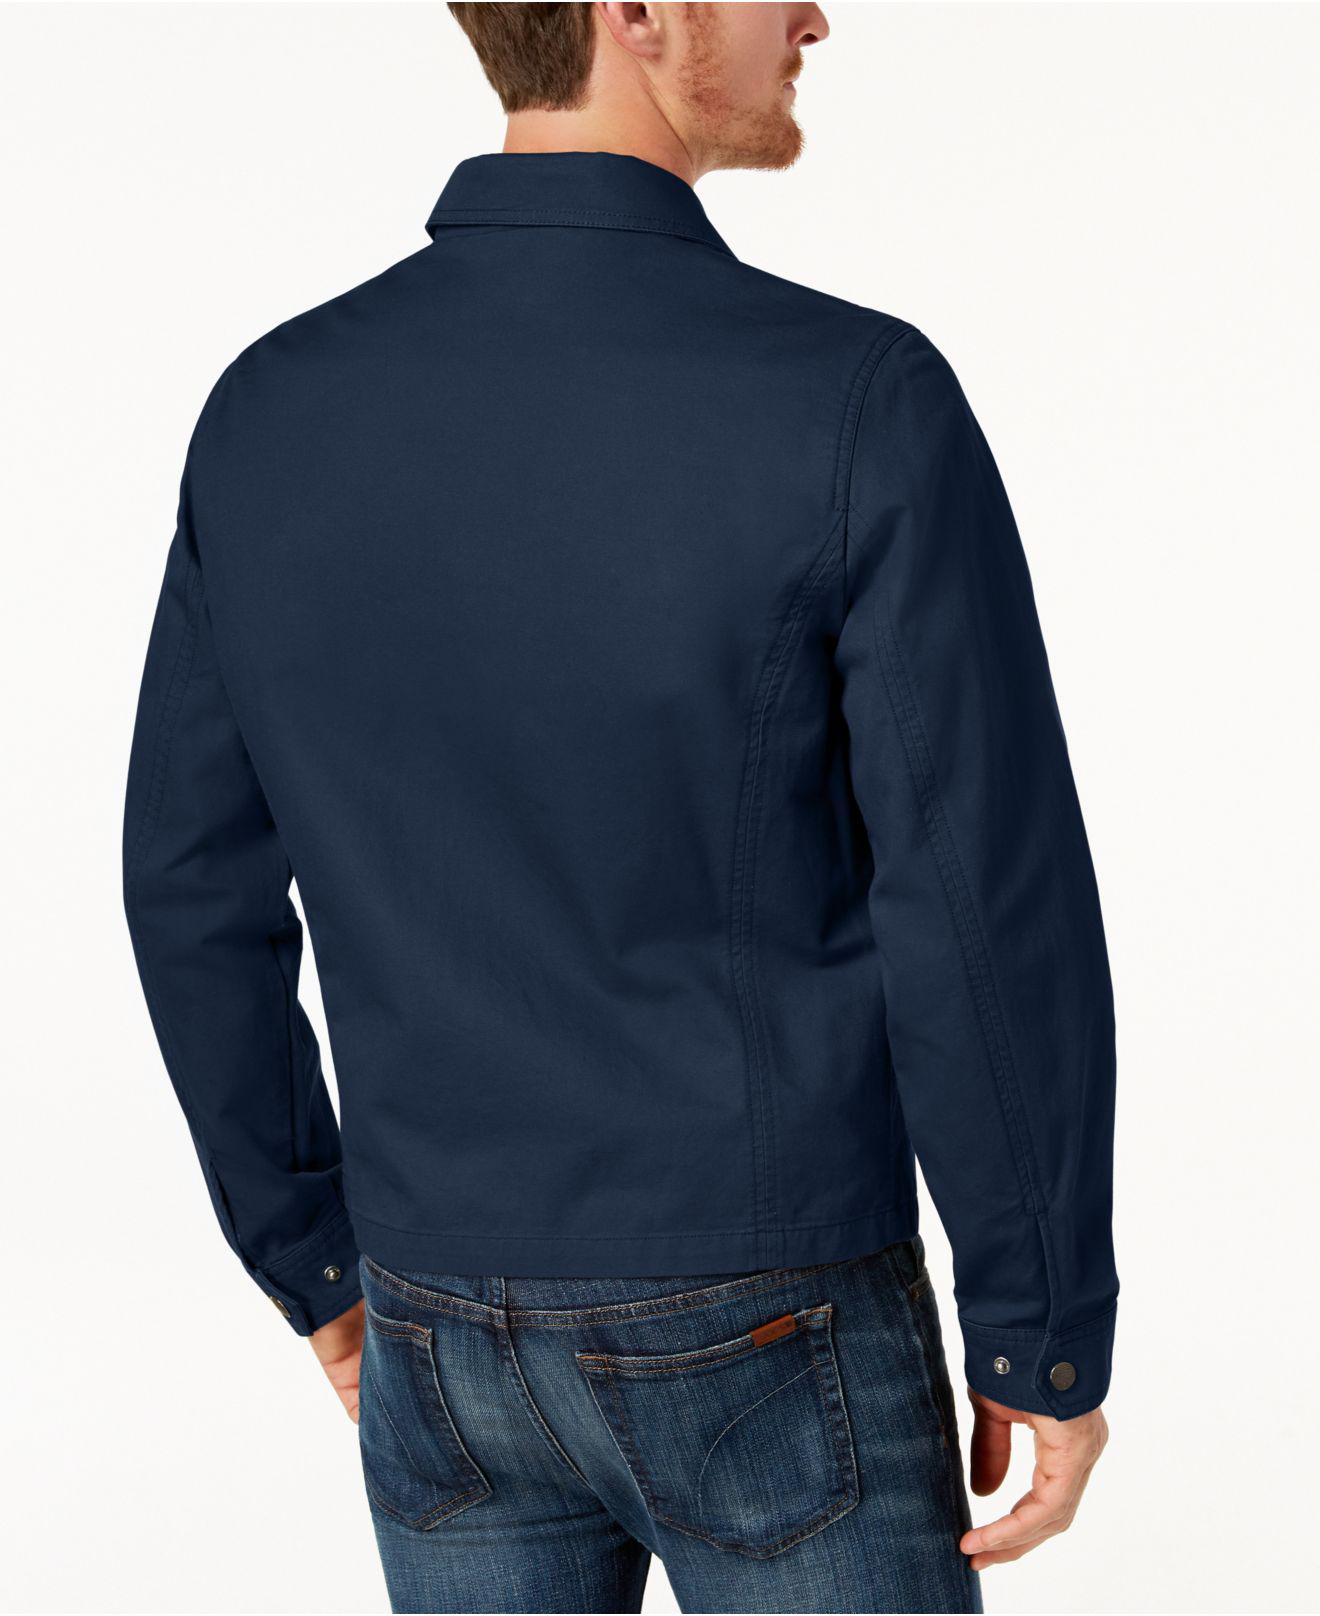 Lucky Brand Cotton Gas Station Jacket in Navy (Blue) for Men - Lyst